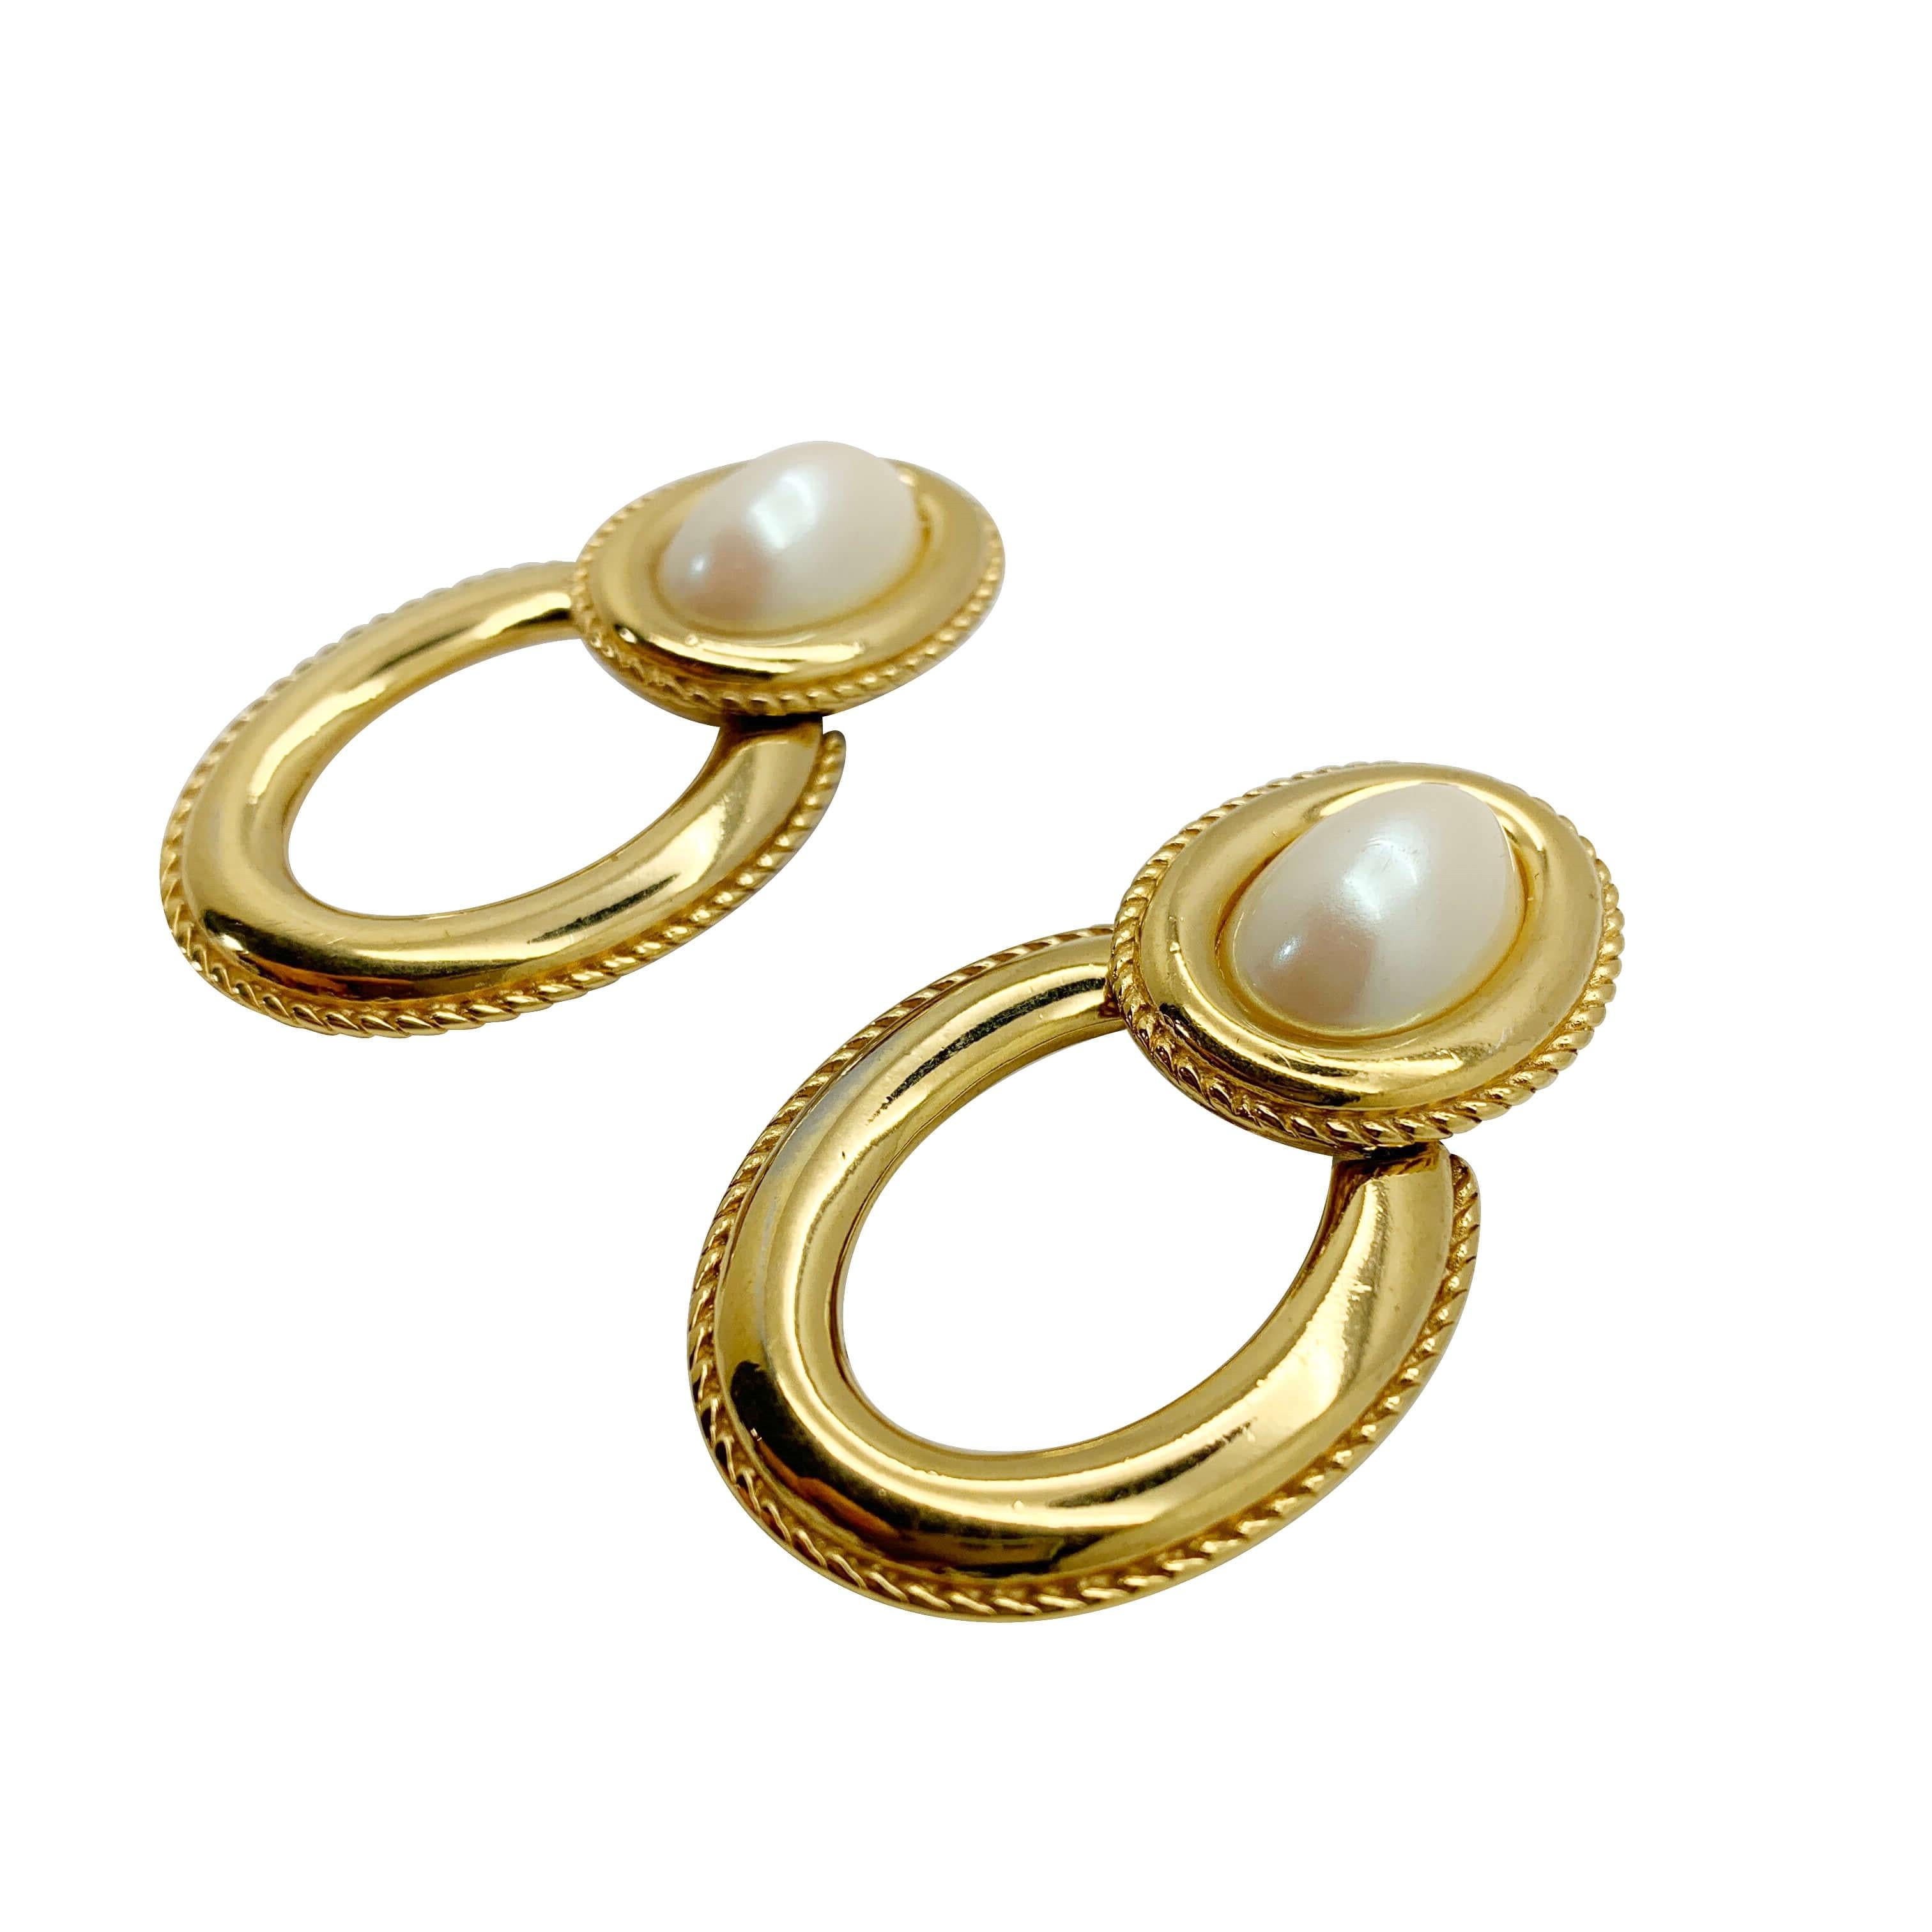 Our Vintage Givenchy Doorknocker Earrings. A total classic from the Parisian House. Embellished with a lustrous simulated pearl creating a classic contrast with the lustrous golden finish.
One of the late great 20th century couturiers, Hubert de